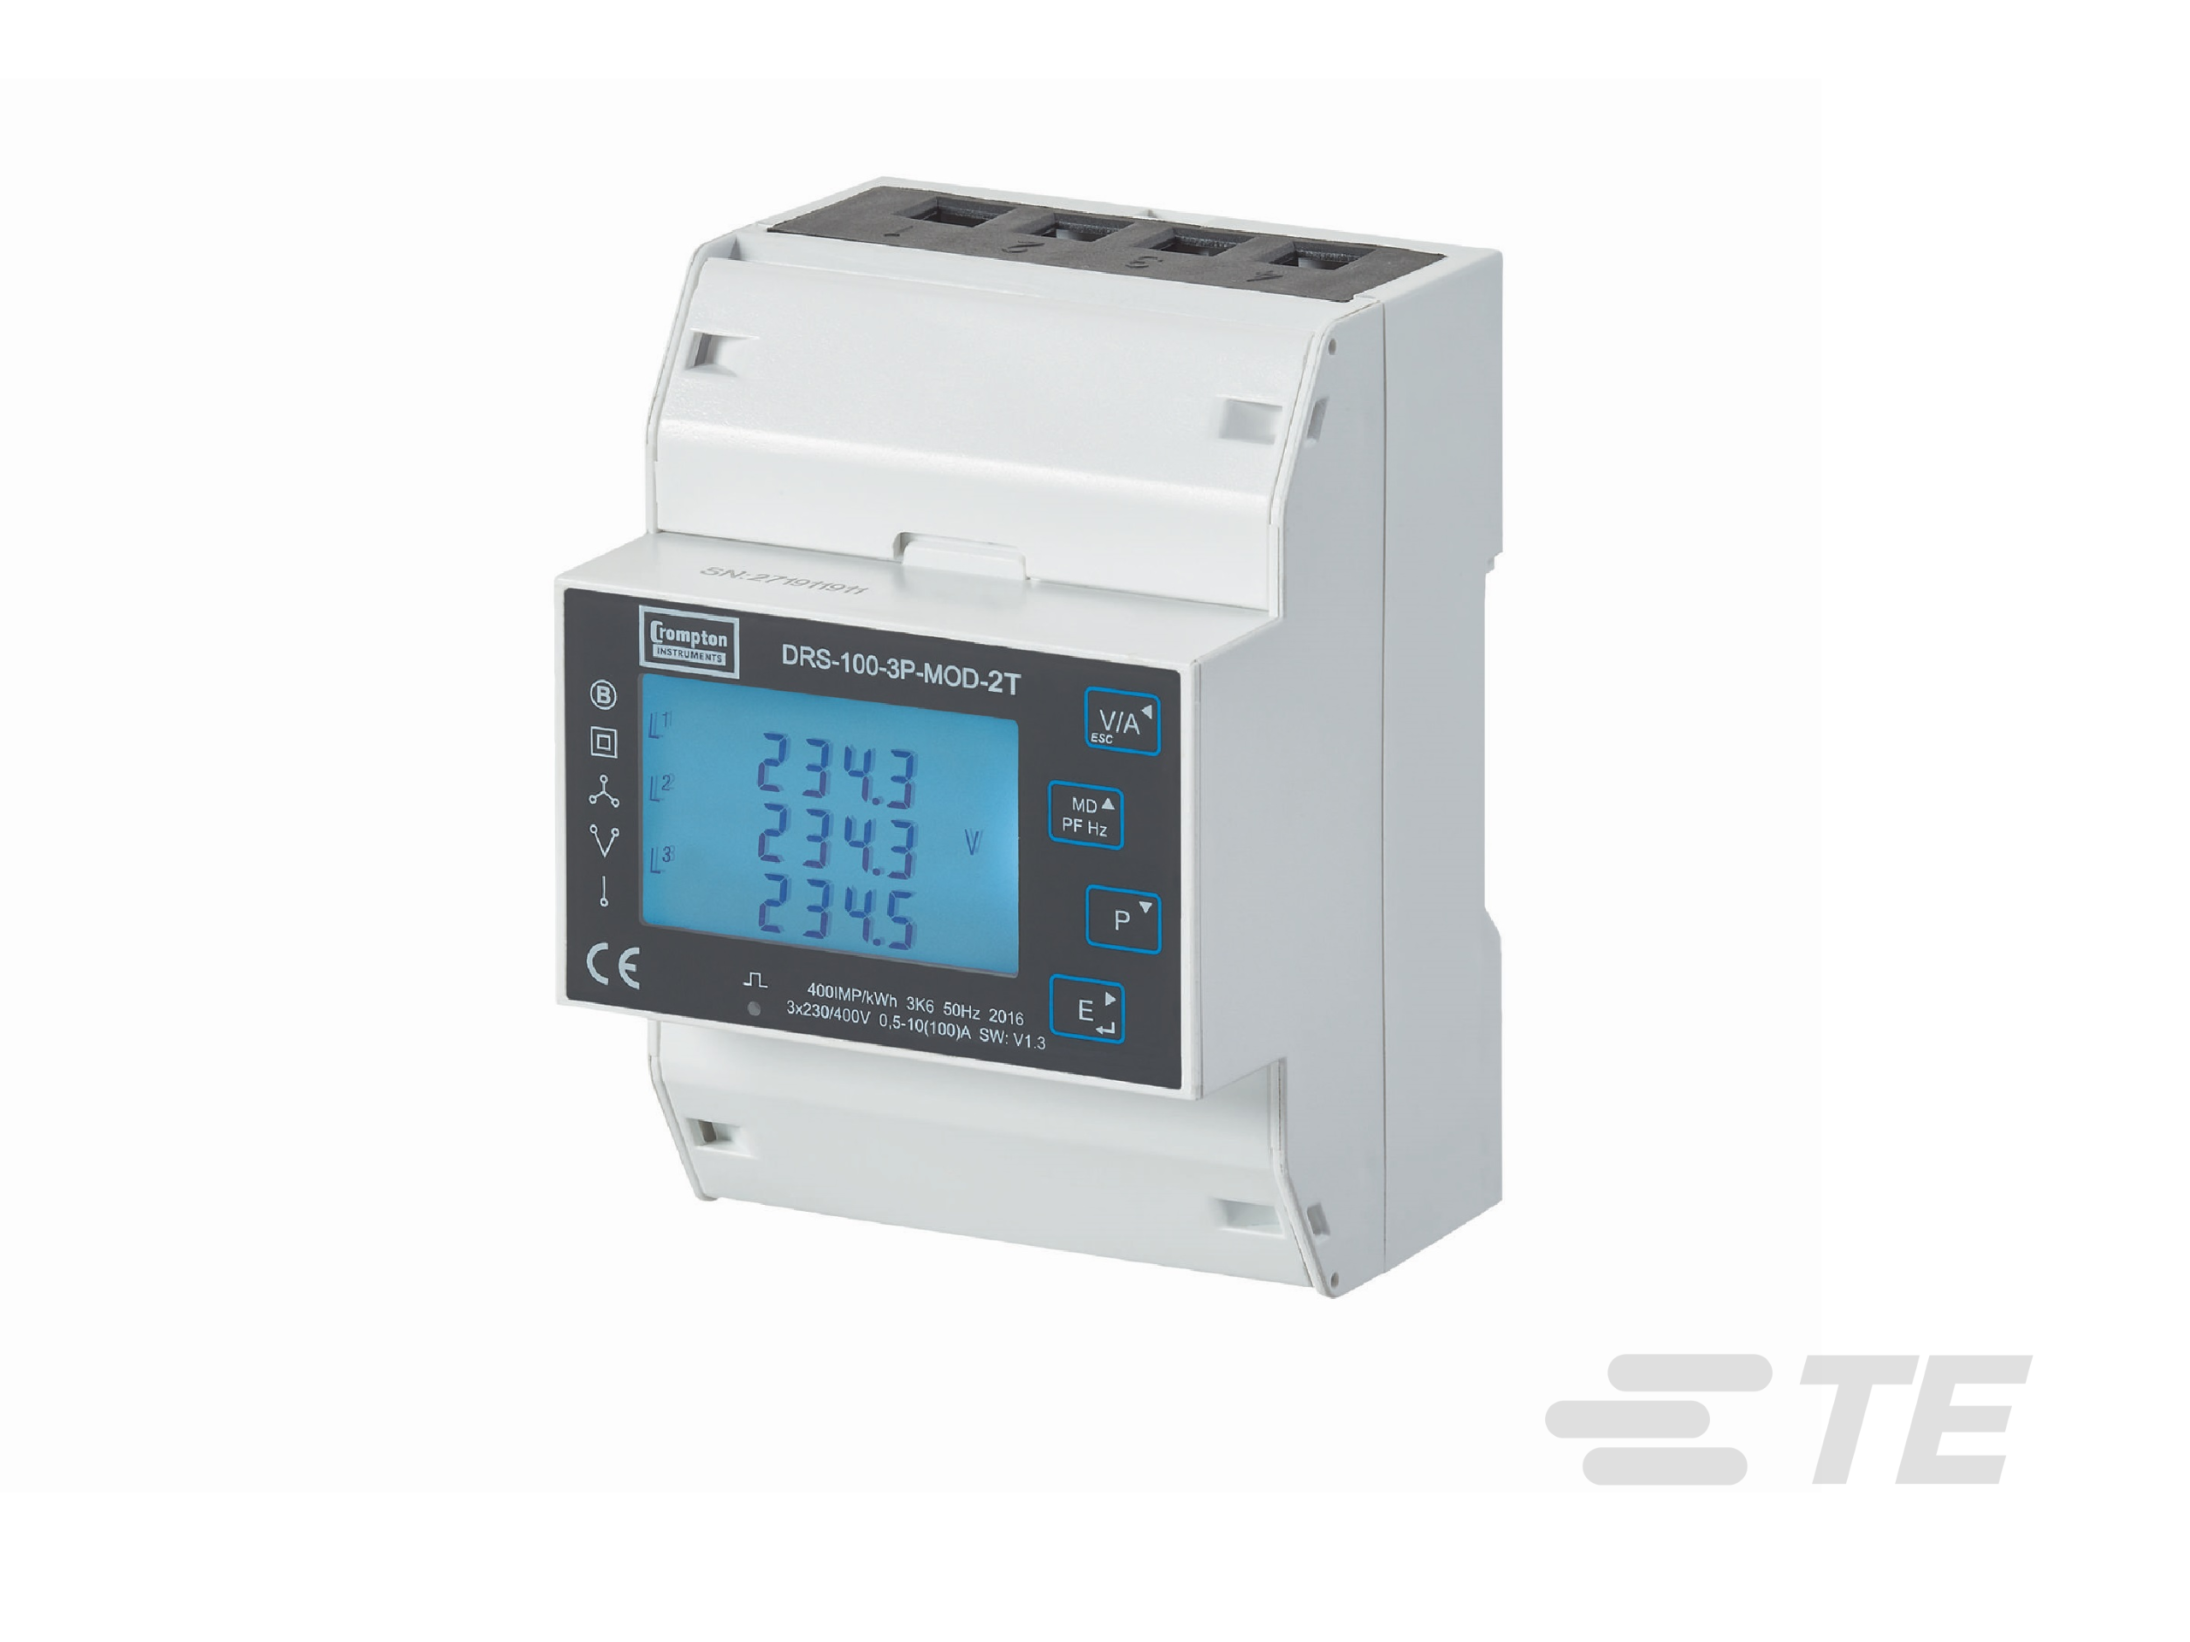 TTI Presents the DRS-100-3P MID Energy Meter from TE Connectivity